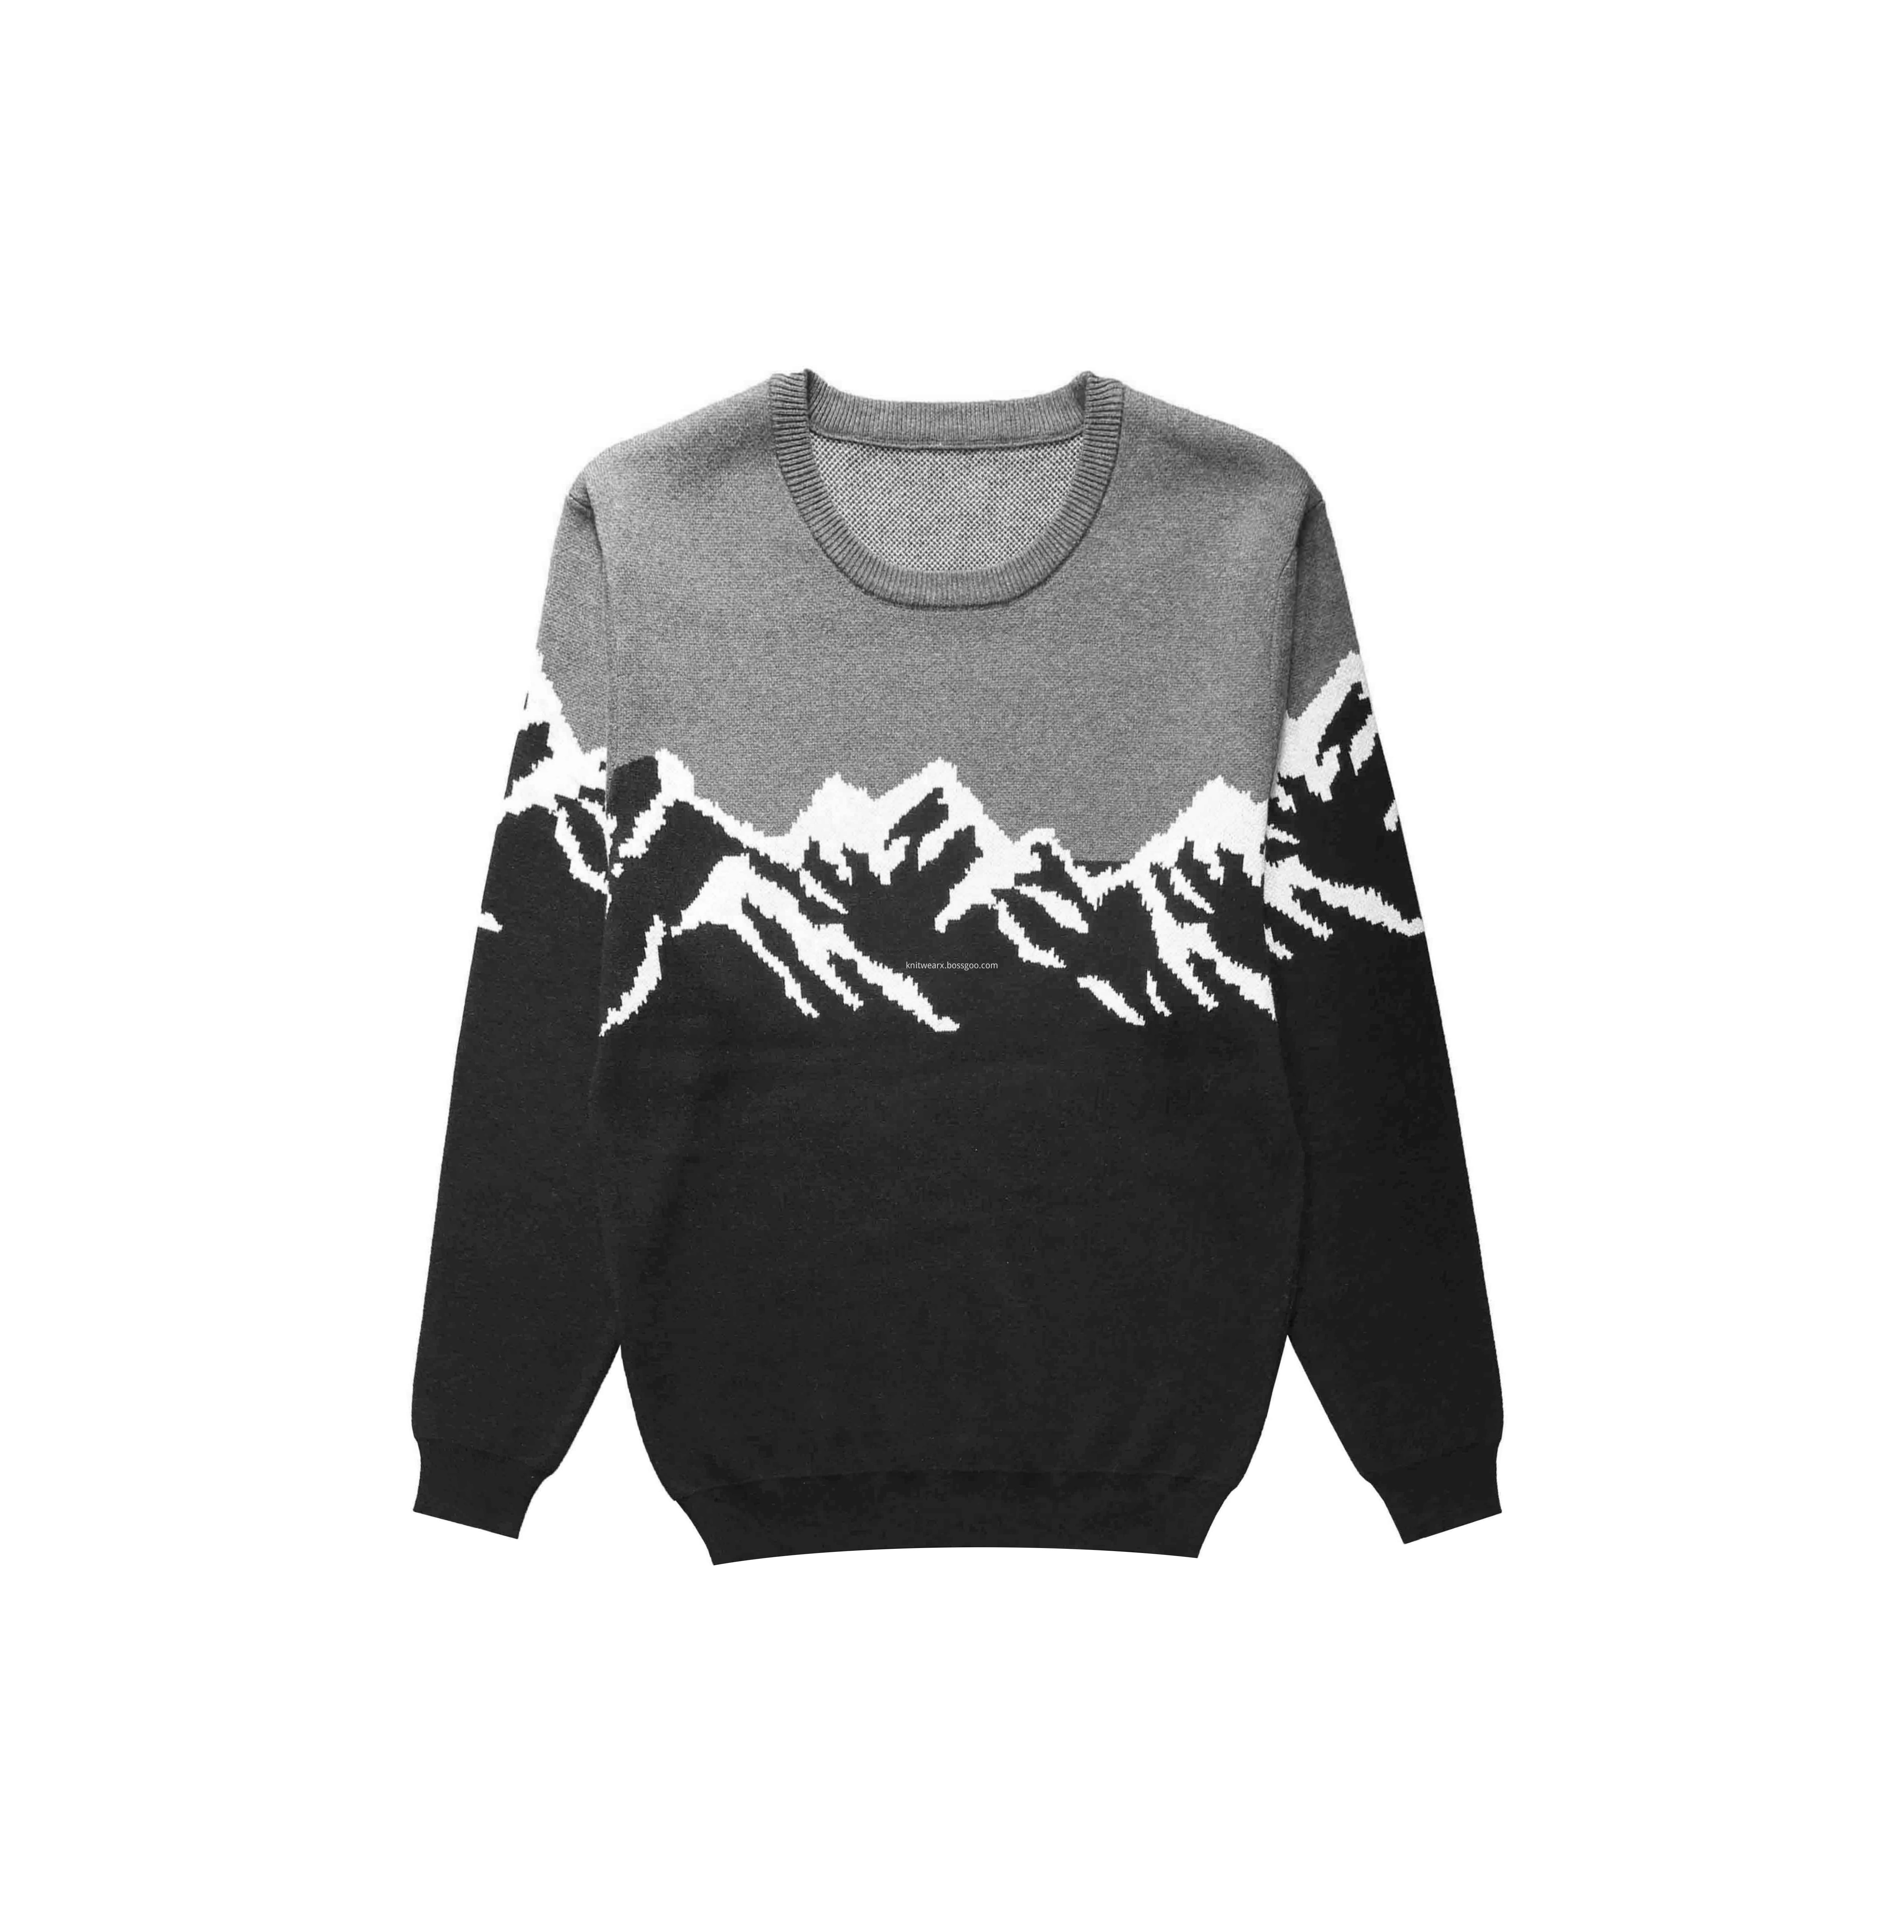 Men's Knitted Snow Mountain Jacquard Crewneck Pullover